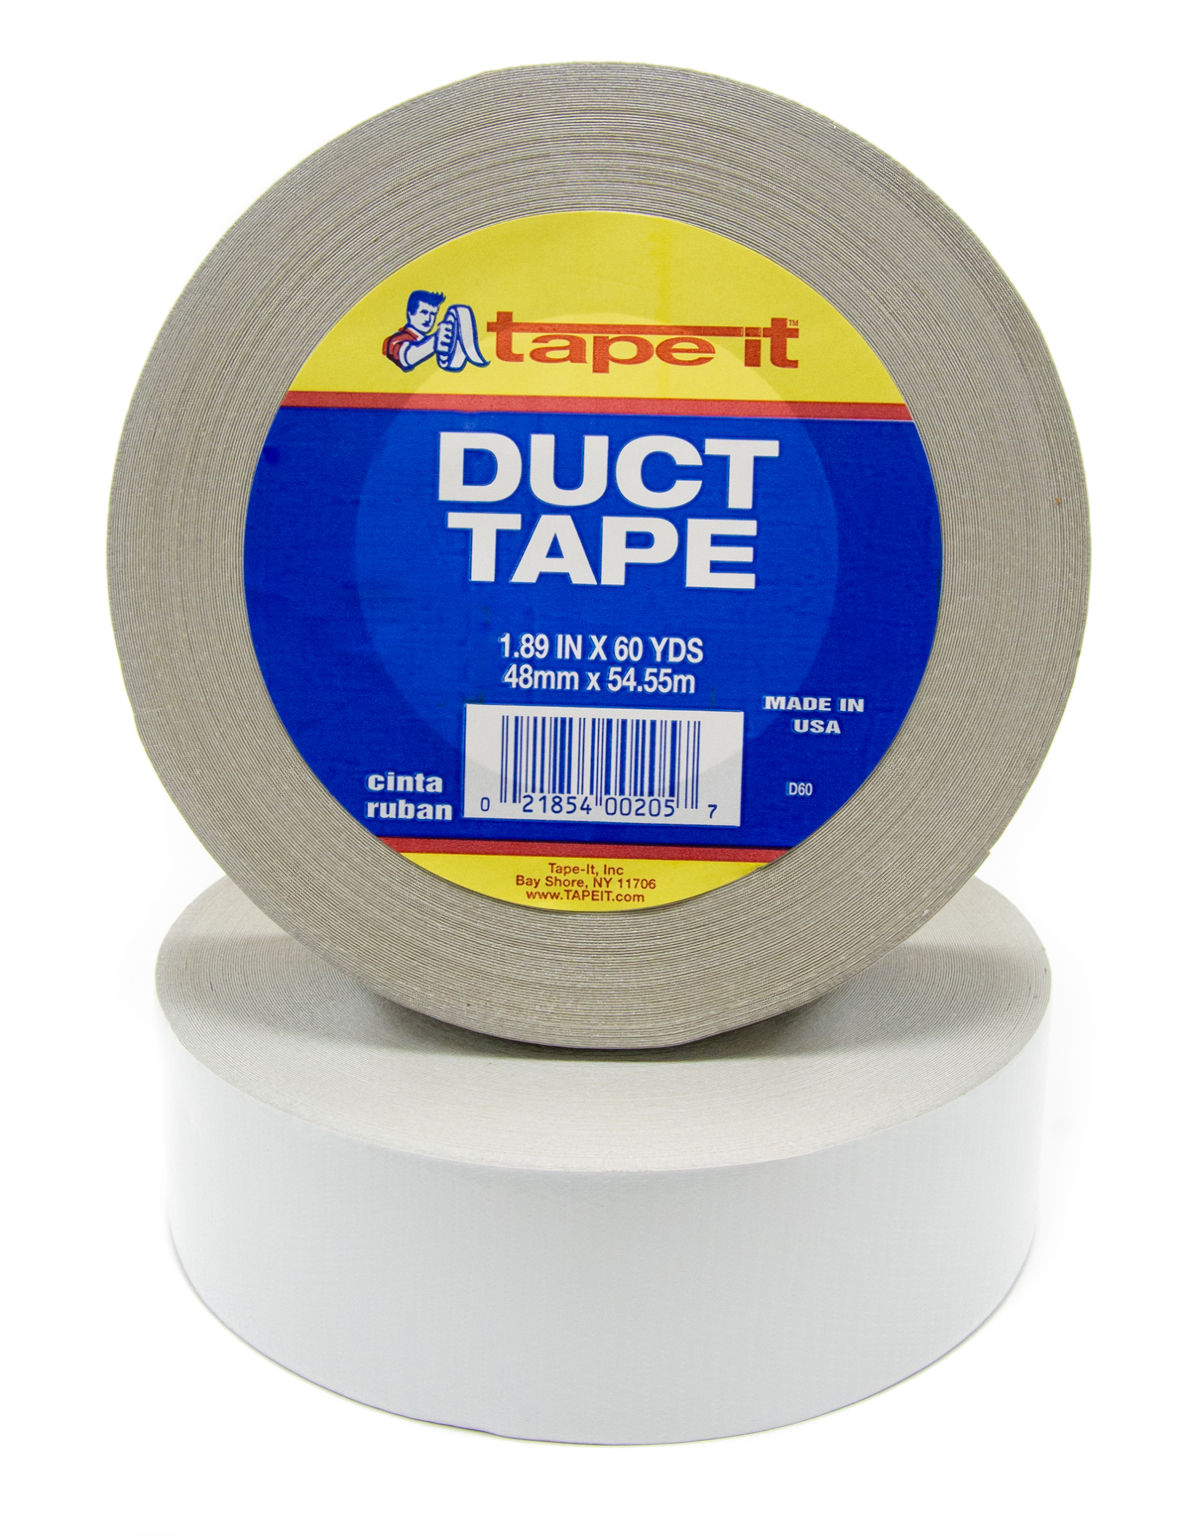 Wholesale Duct Tape - White - 1.89